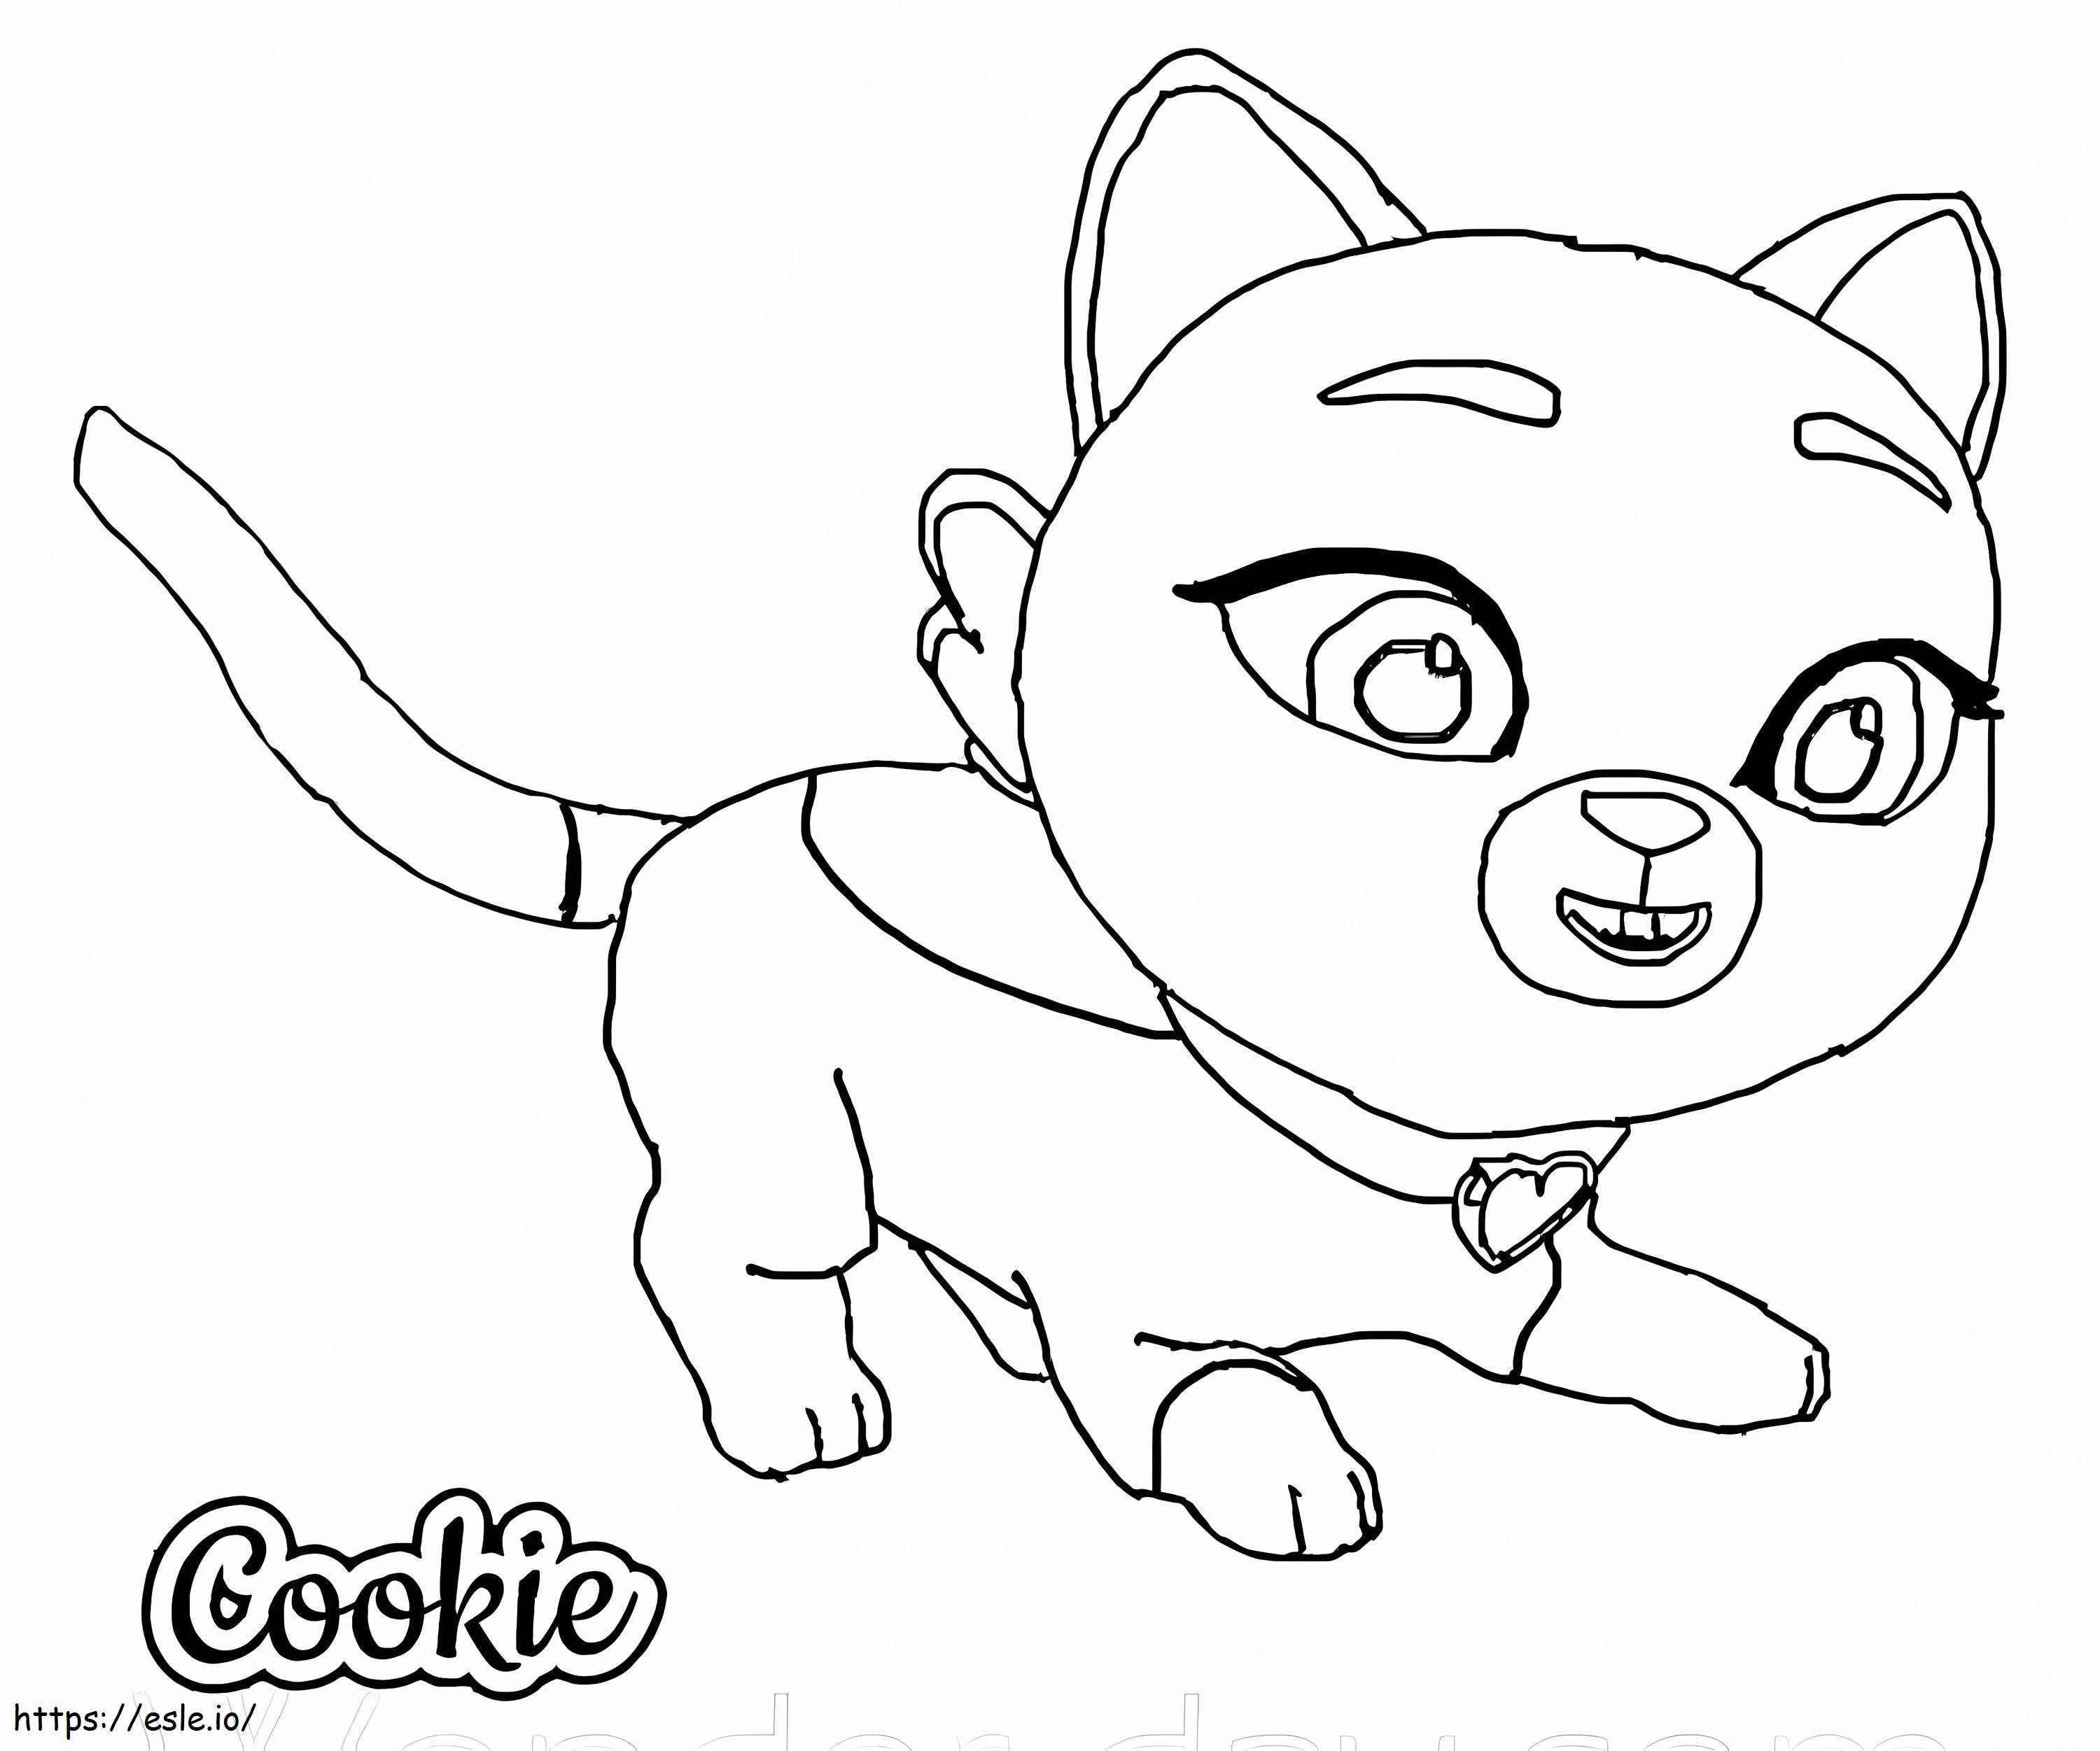 Cookie From Butterbeans Cafe coloring page